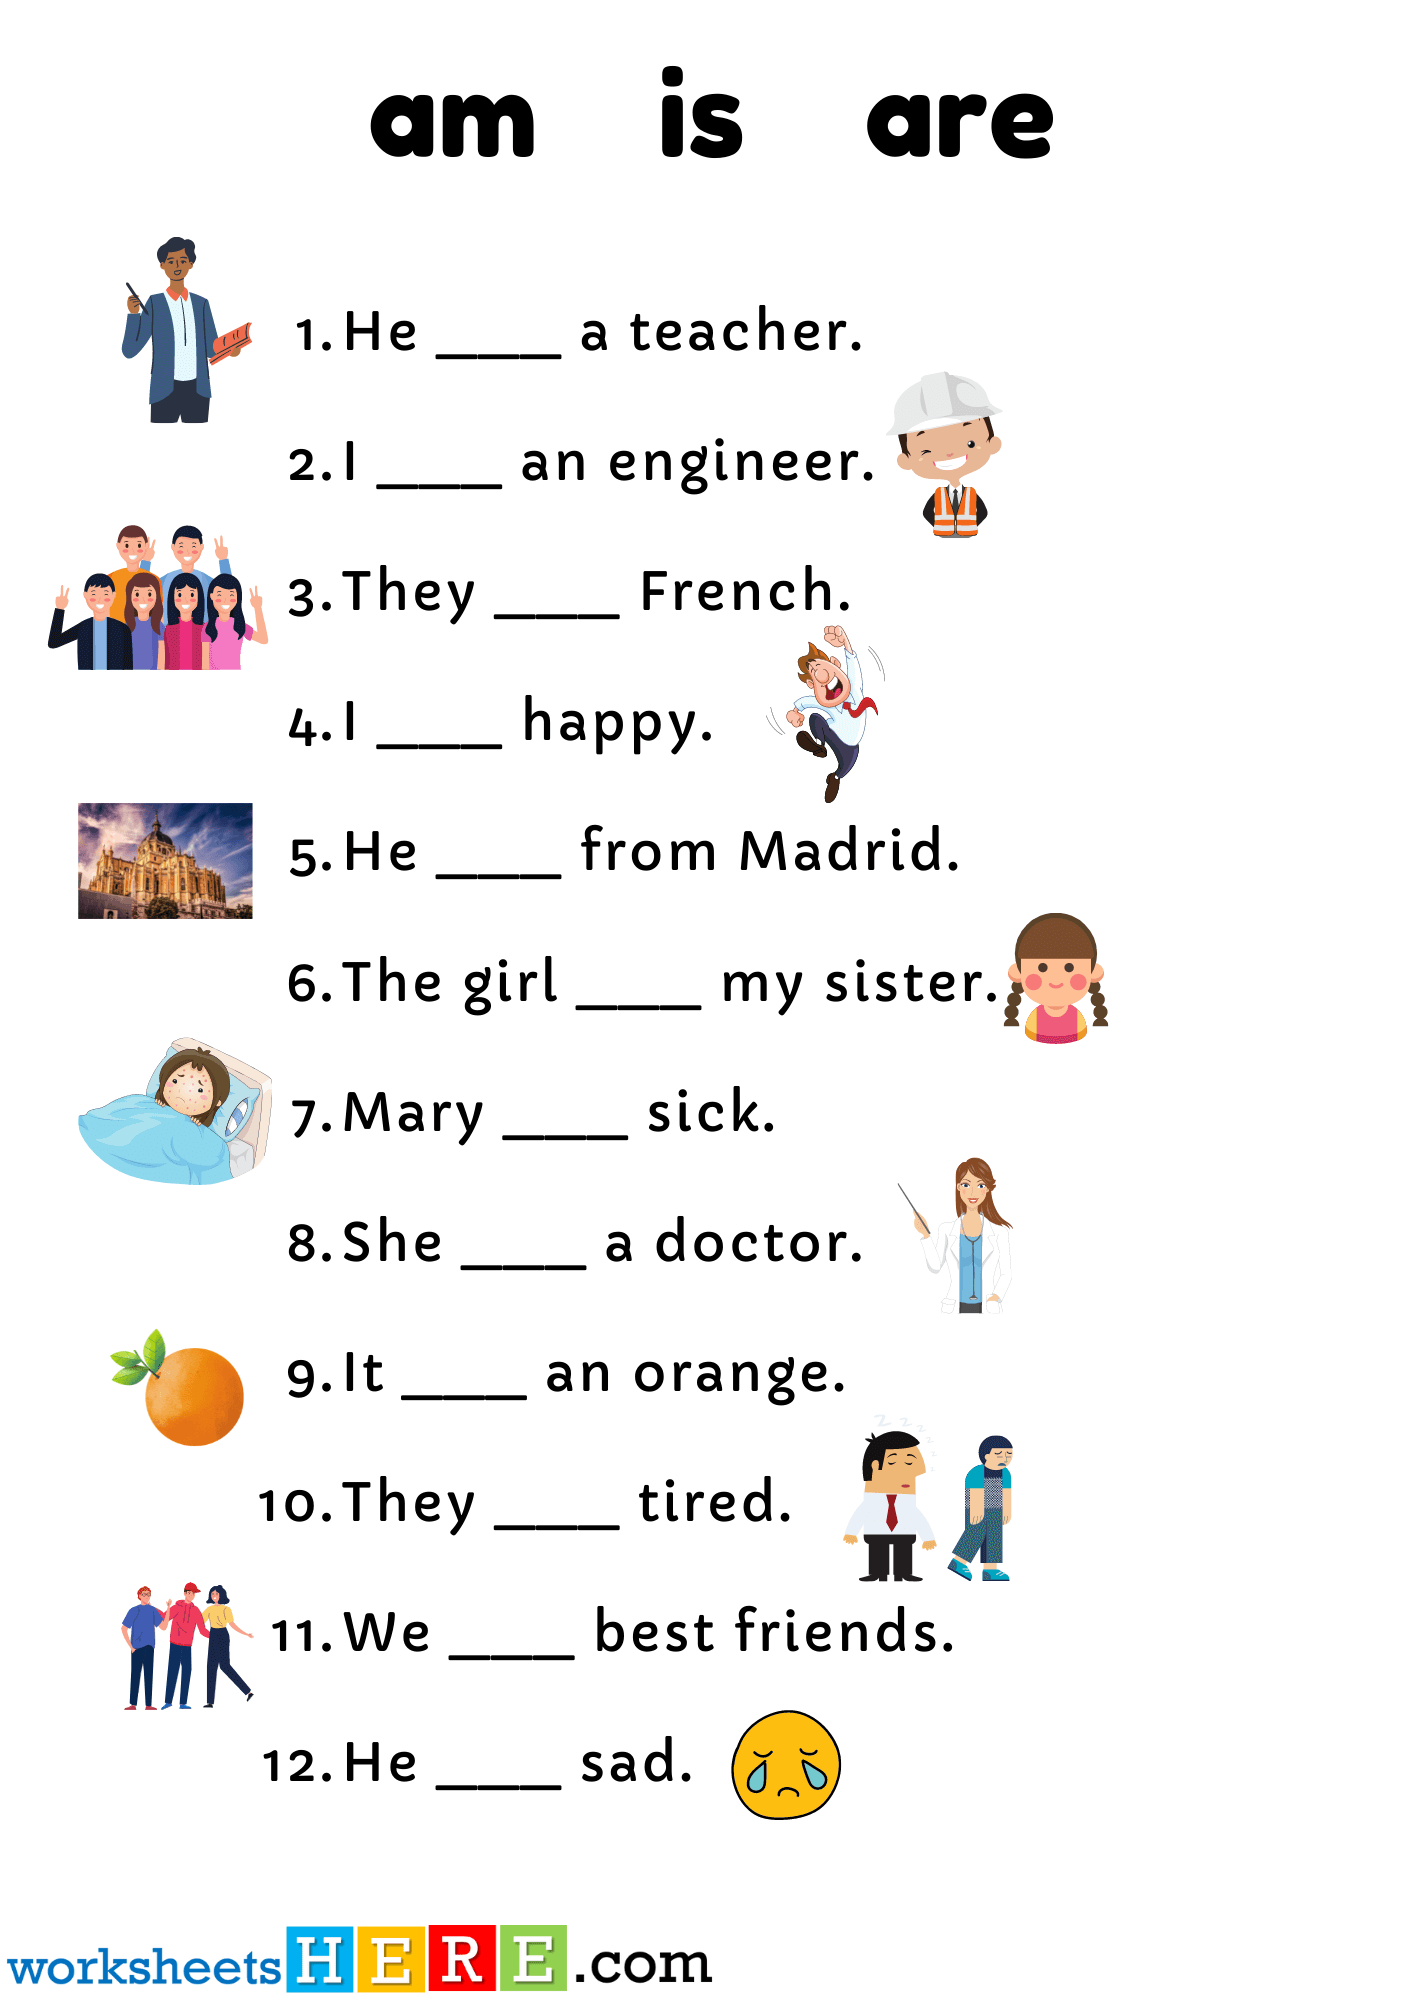 Verb To Be am is are Exercises and Answers with Pictures PDF Worksheet For Kids